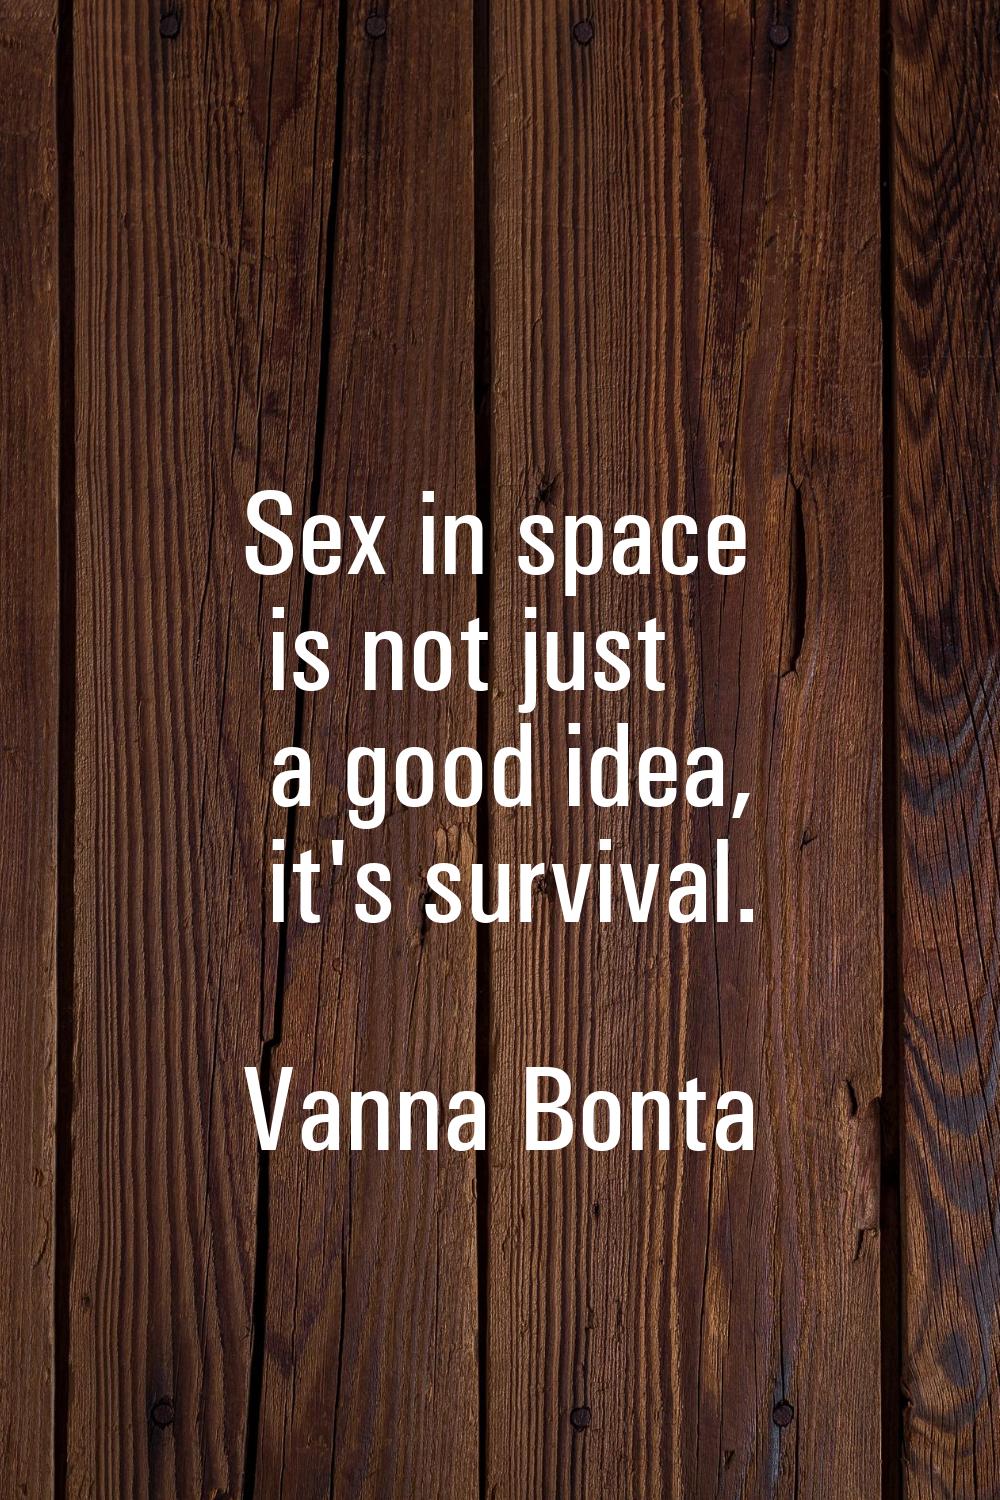 Sex in space is not just a good idea, it's survival.